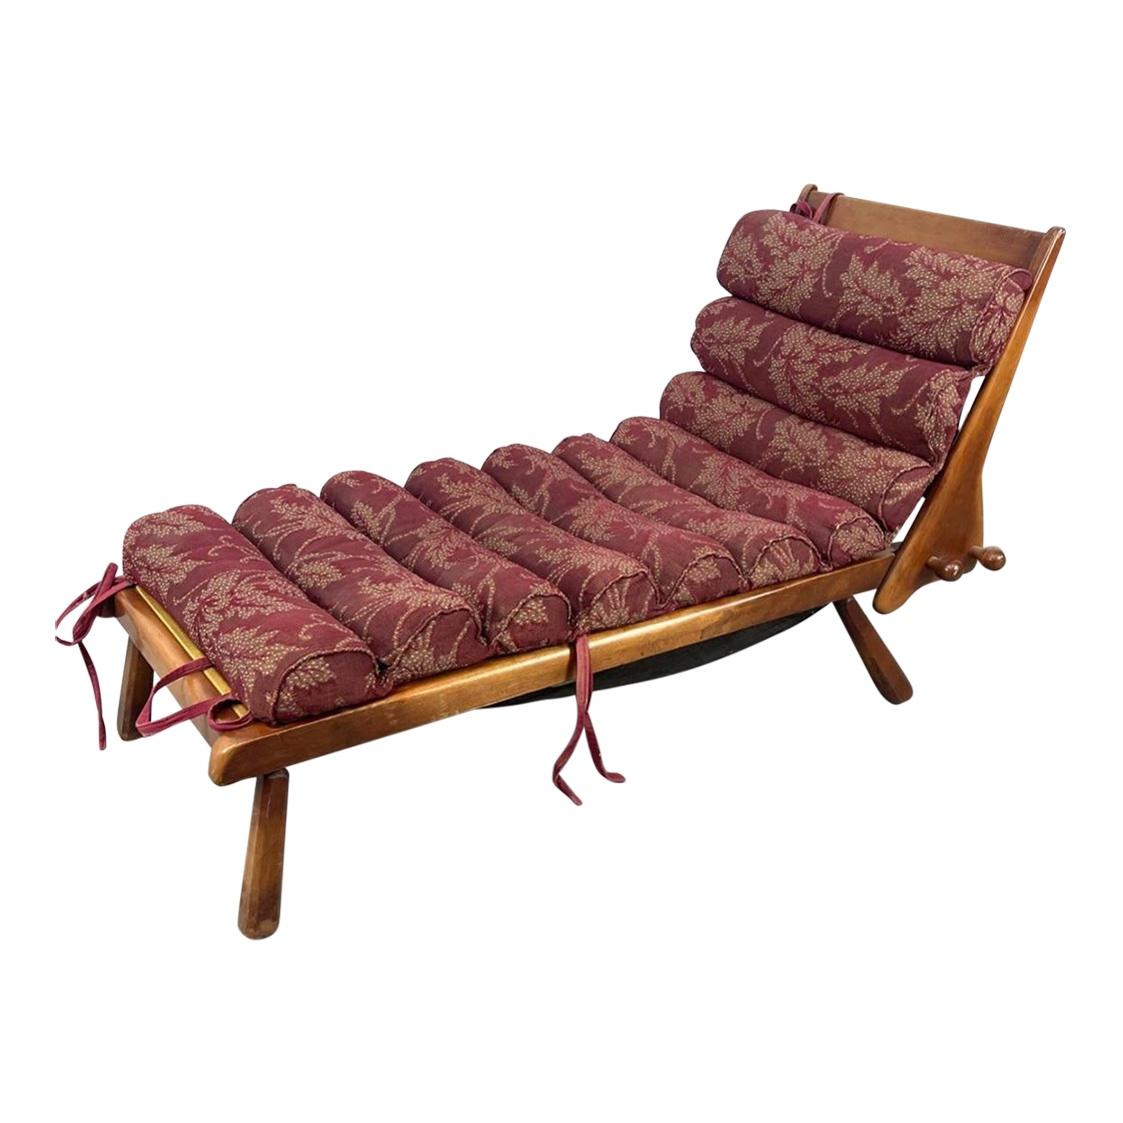 Upholstery 1960s Cushman Furniture Rock Maple Chaise Lounge Chair For Sale